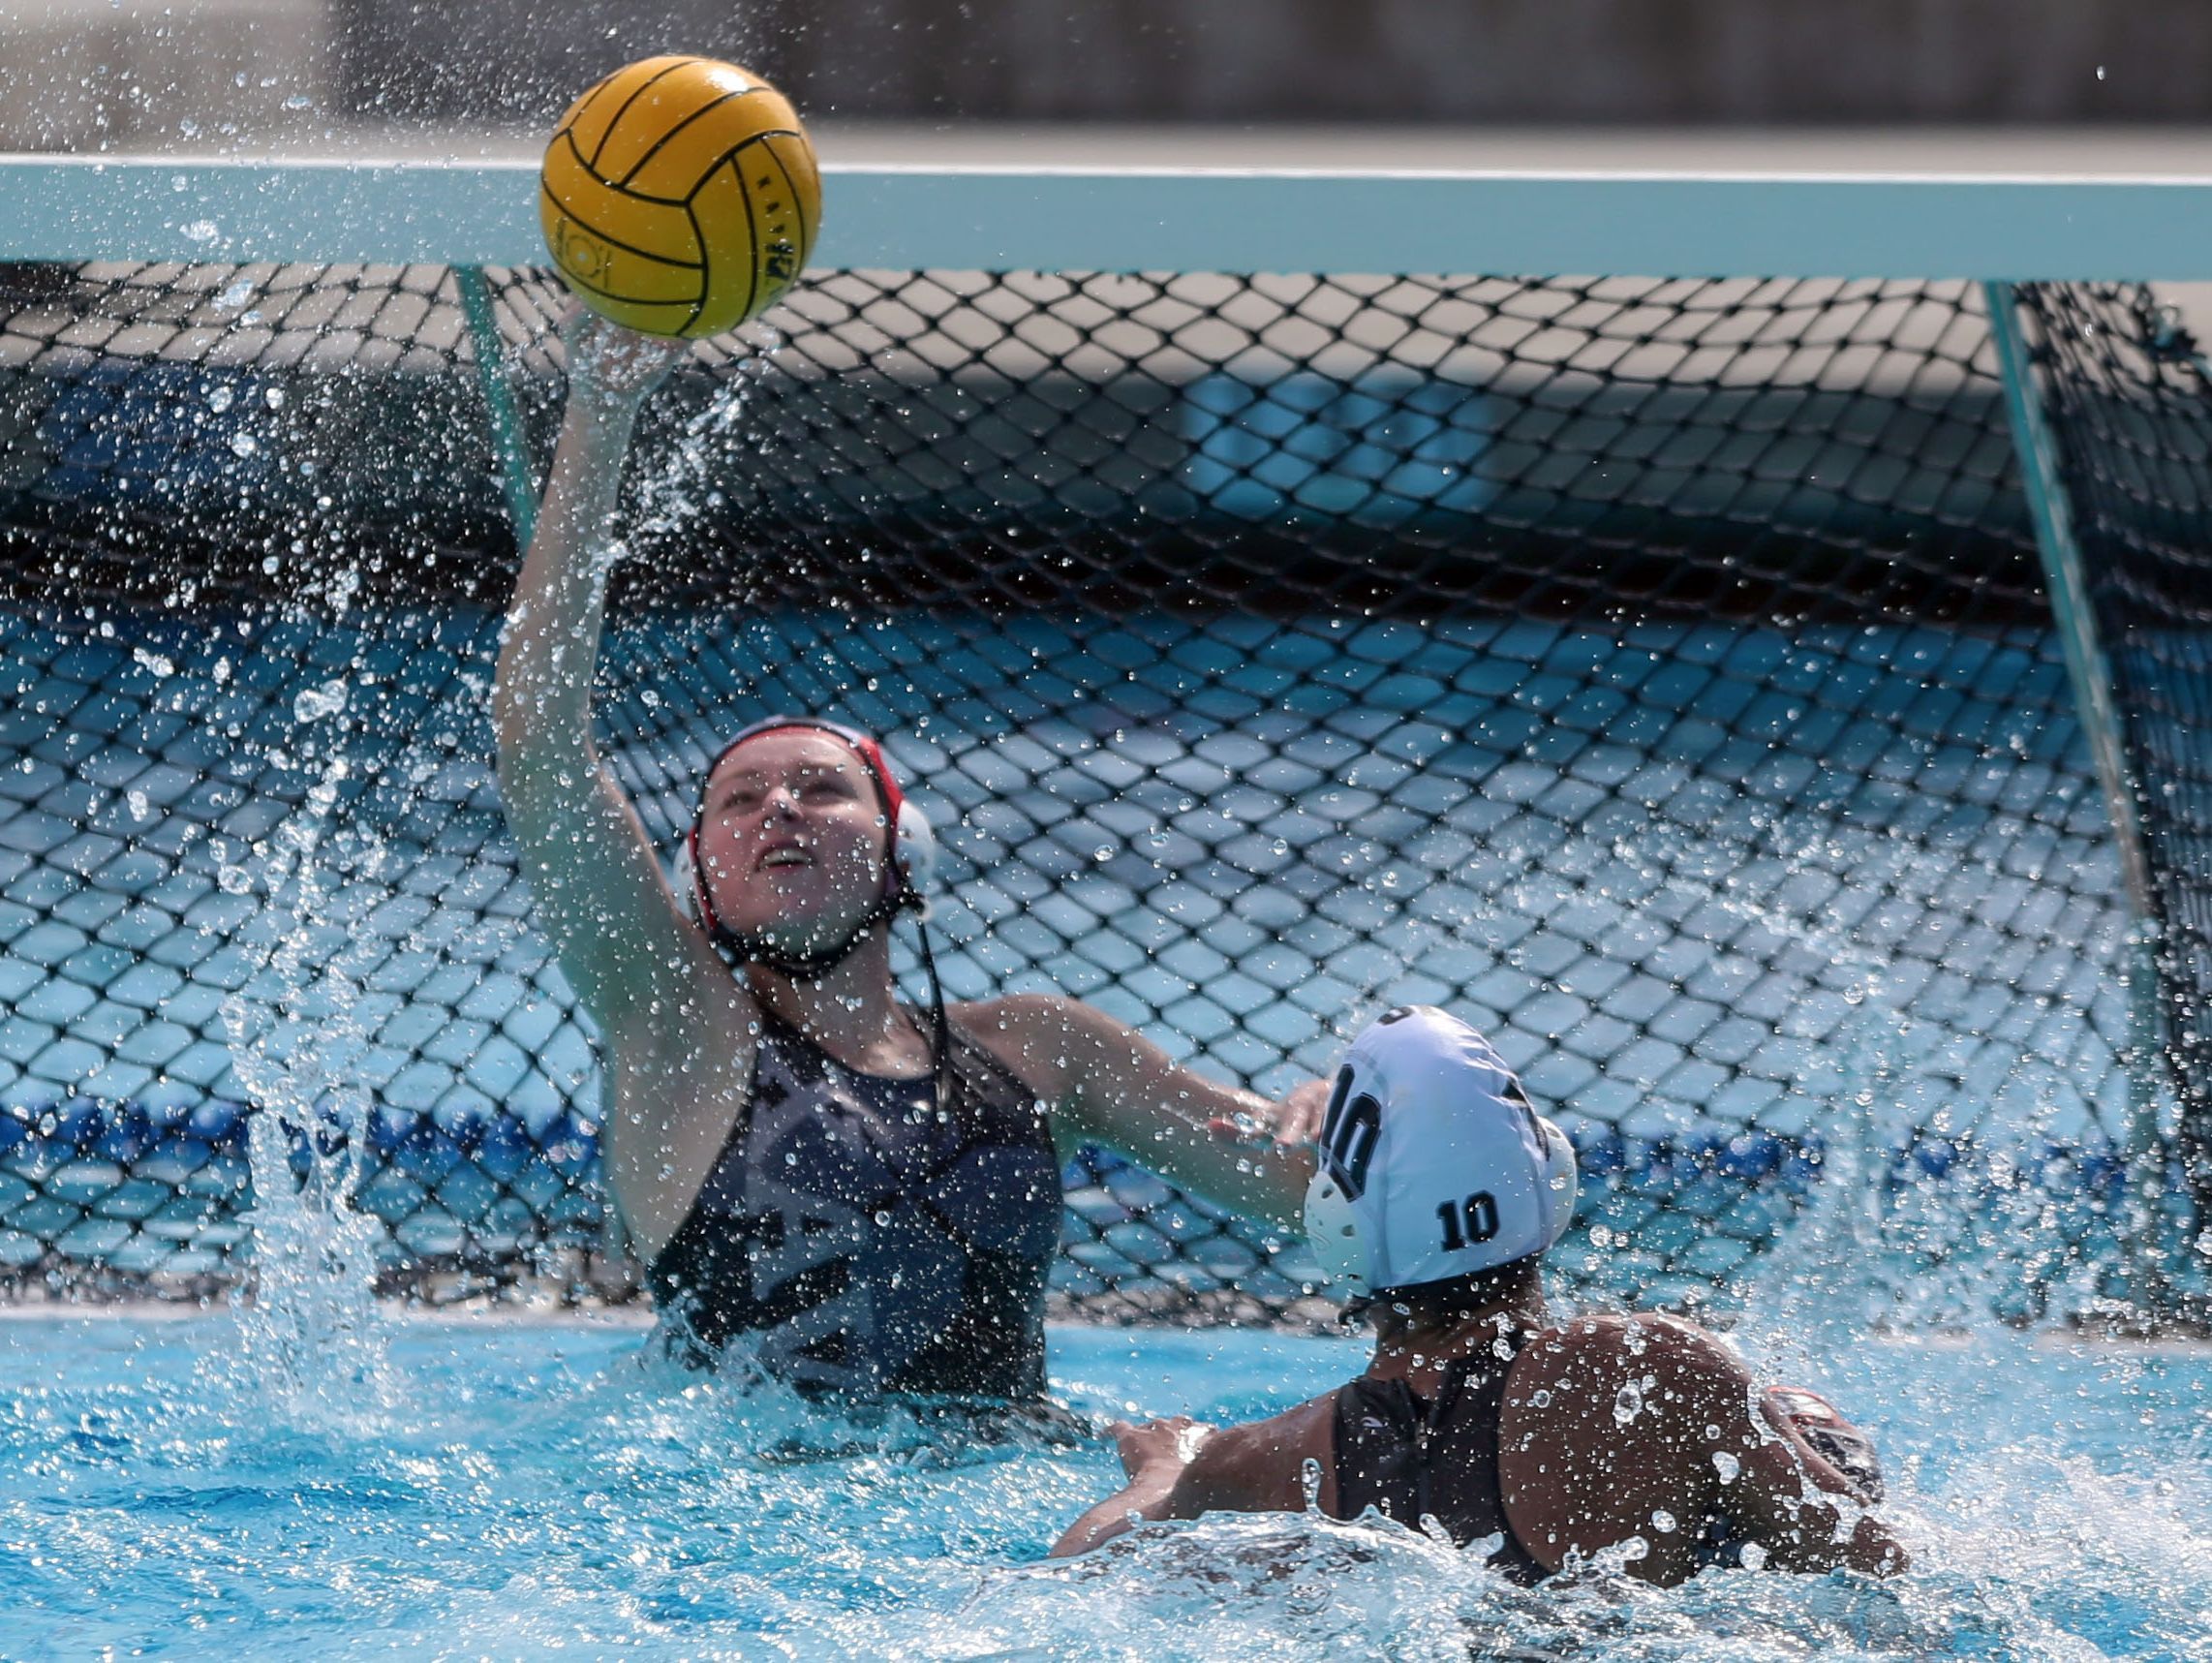 Xavier Preparatory's Olivia Quagliani makes a save against the Polytechnic Panthers during the CIF Southern Section Division 5 finals in Irvine on Saturday, February 25, 2017.